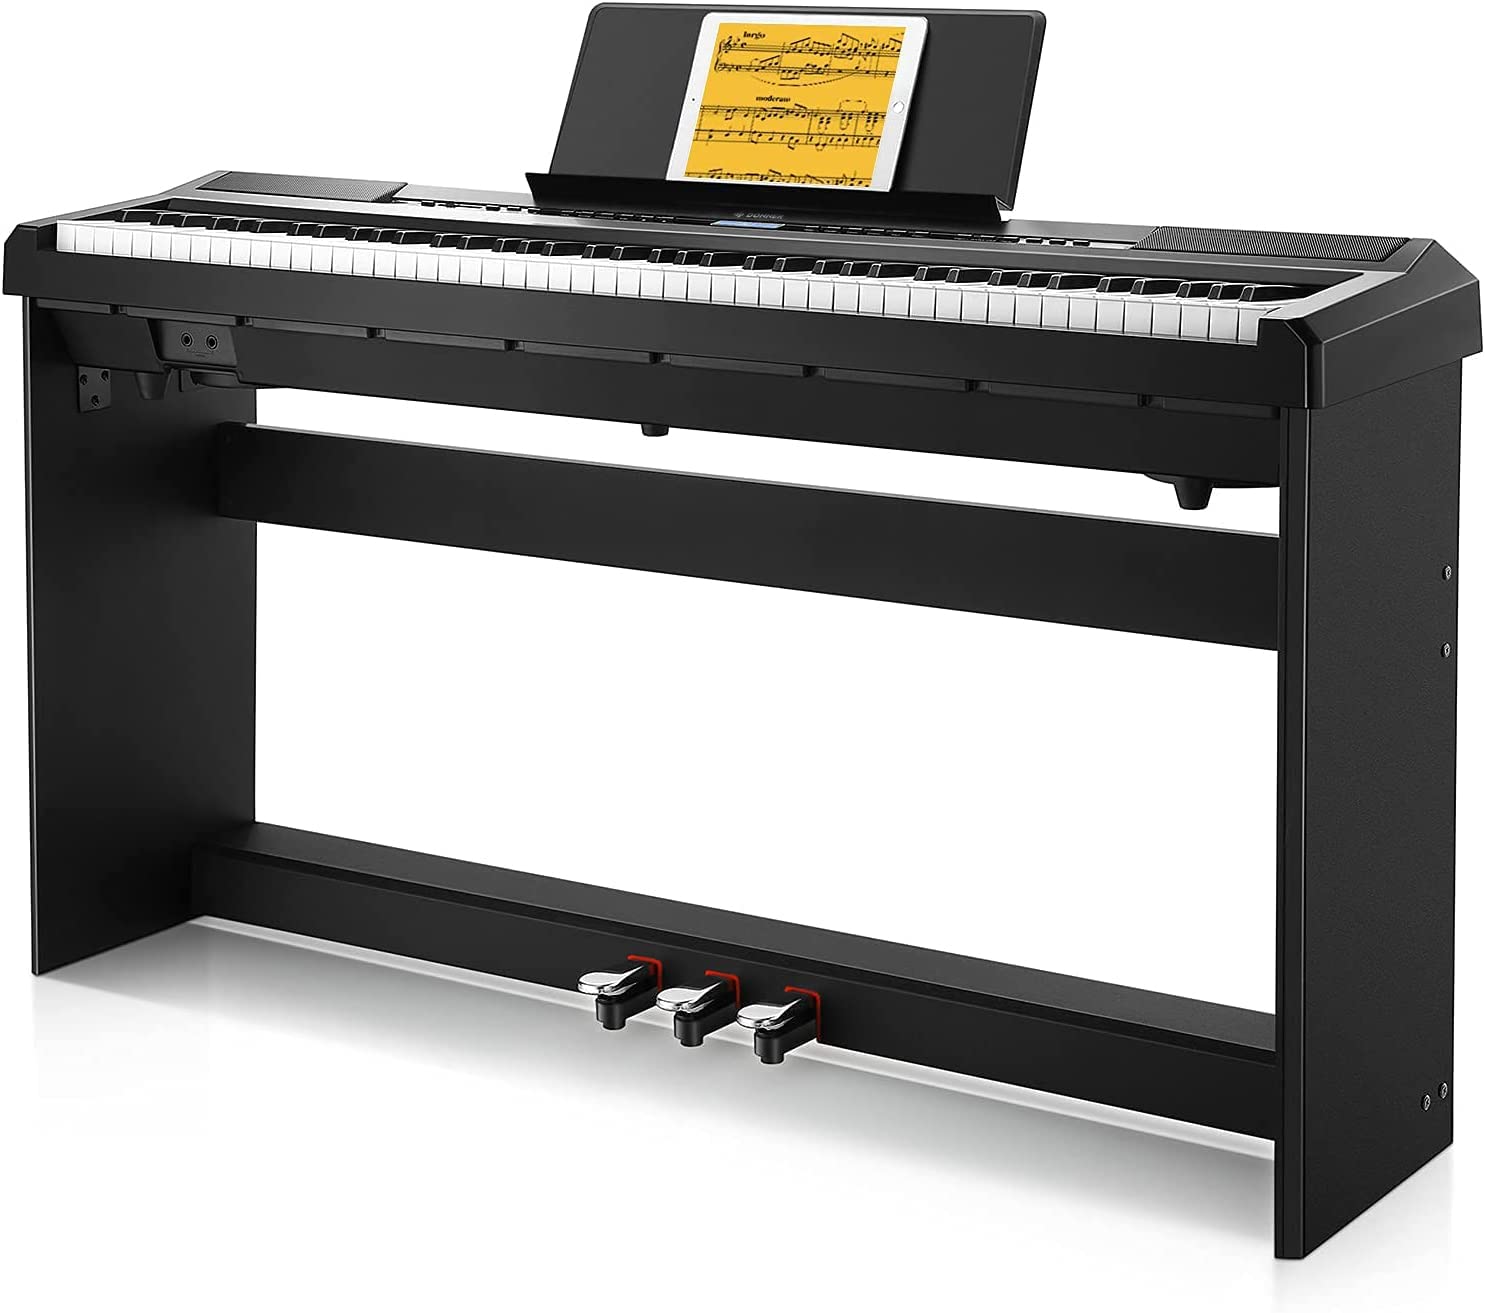 Donner DEP-20 Beginner Digital Piano 88 Key Full Size Weighted Keyboard, Portable Electric Piano with Furniture Stand, 3-Pedal U